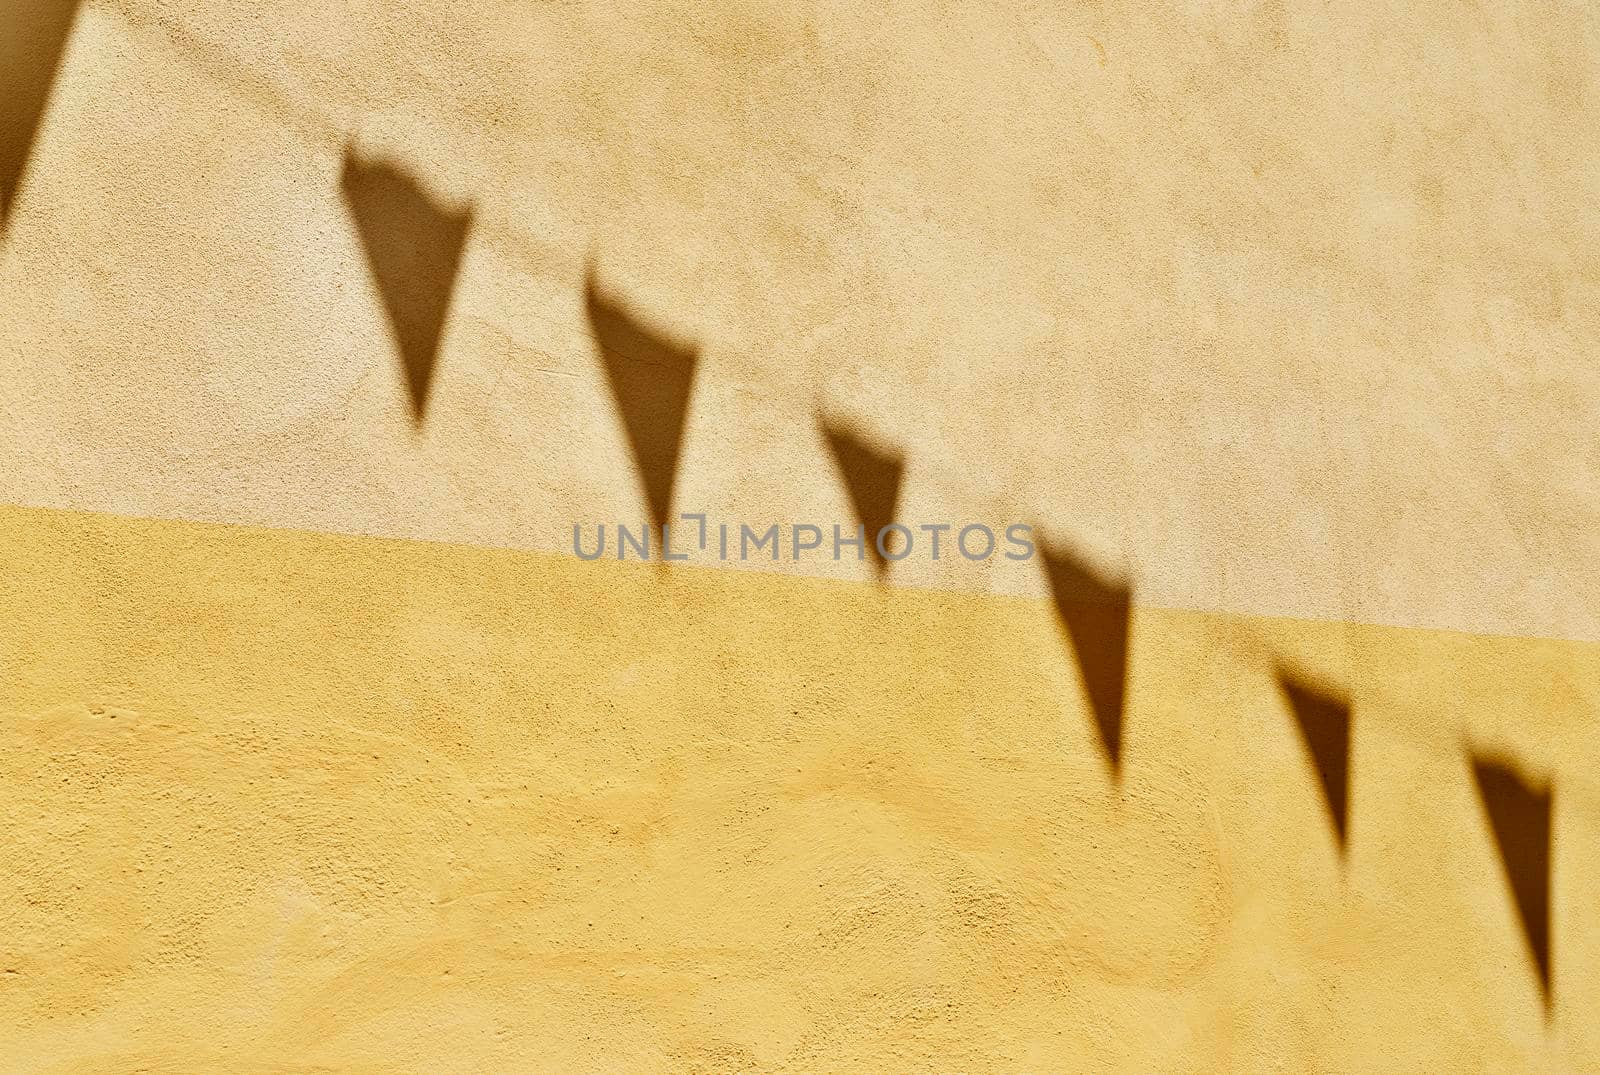 Shadows of bunting flags on yellow wall in a bright day